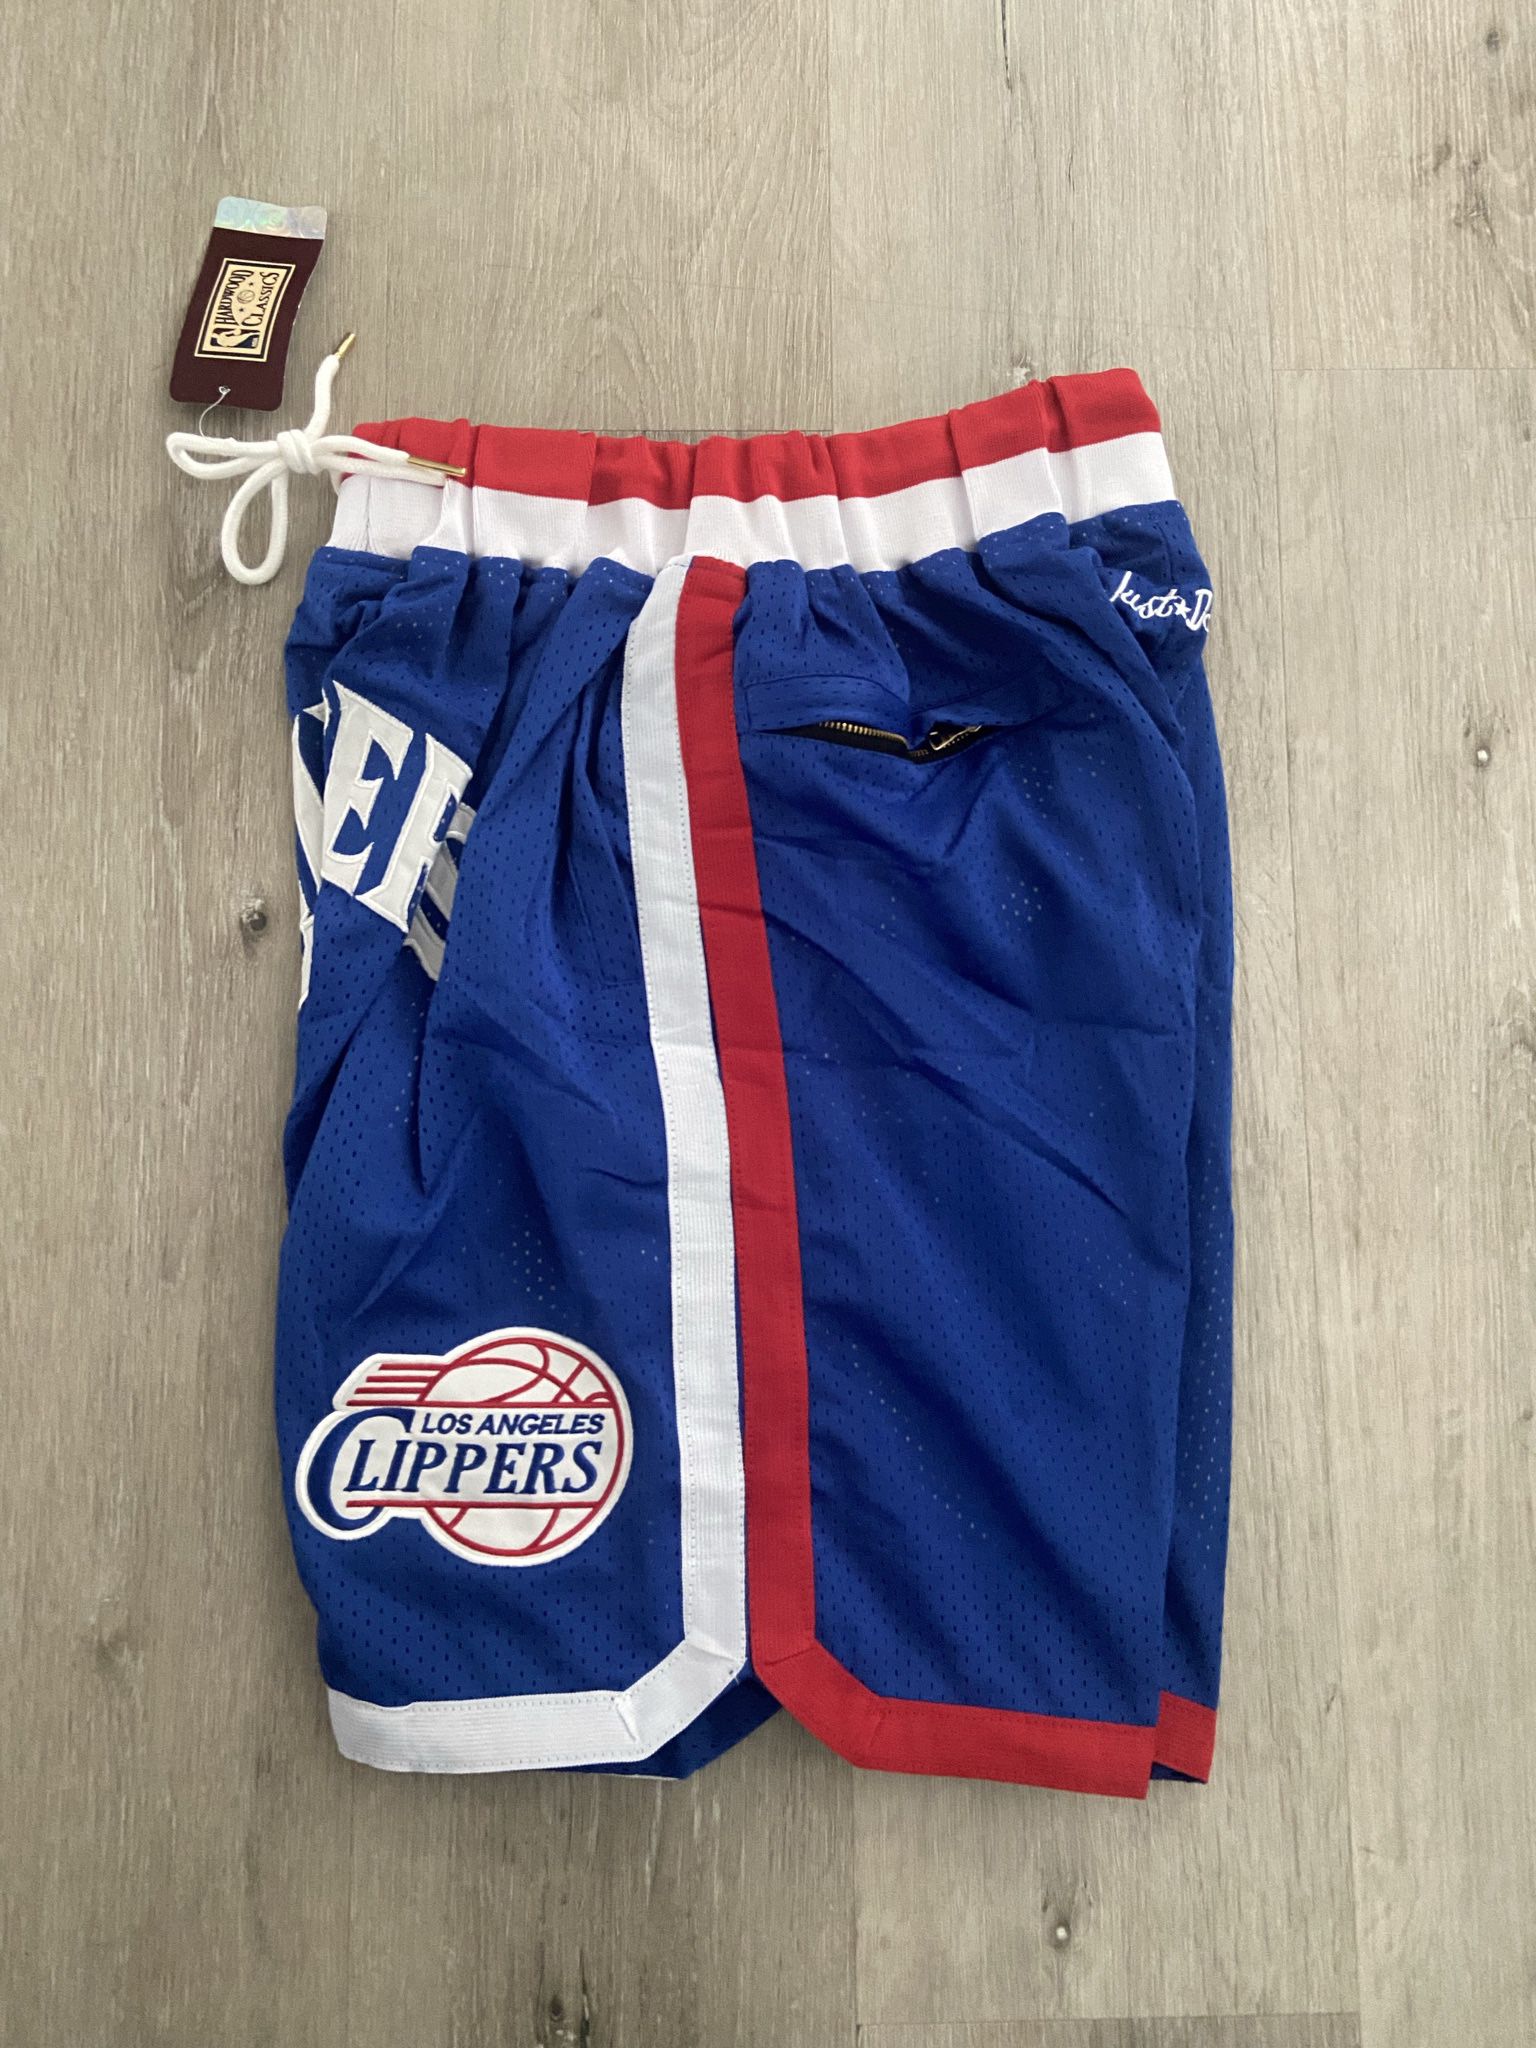 Men Team Basketball Shorts Just Don Los Angeles Clippers Size: XXL